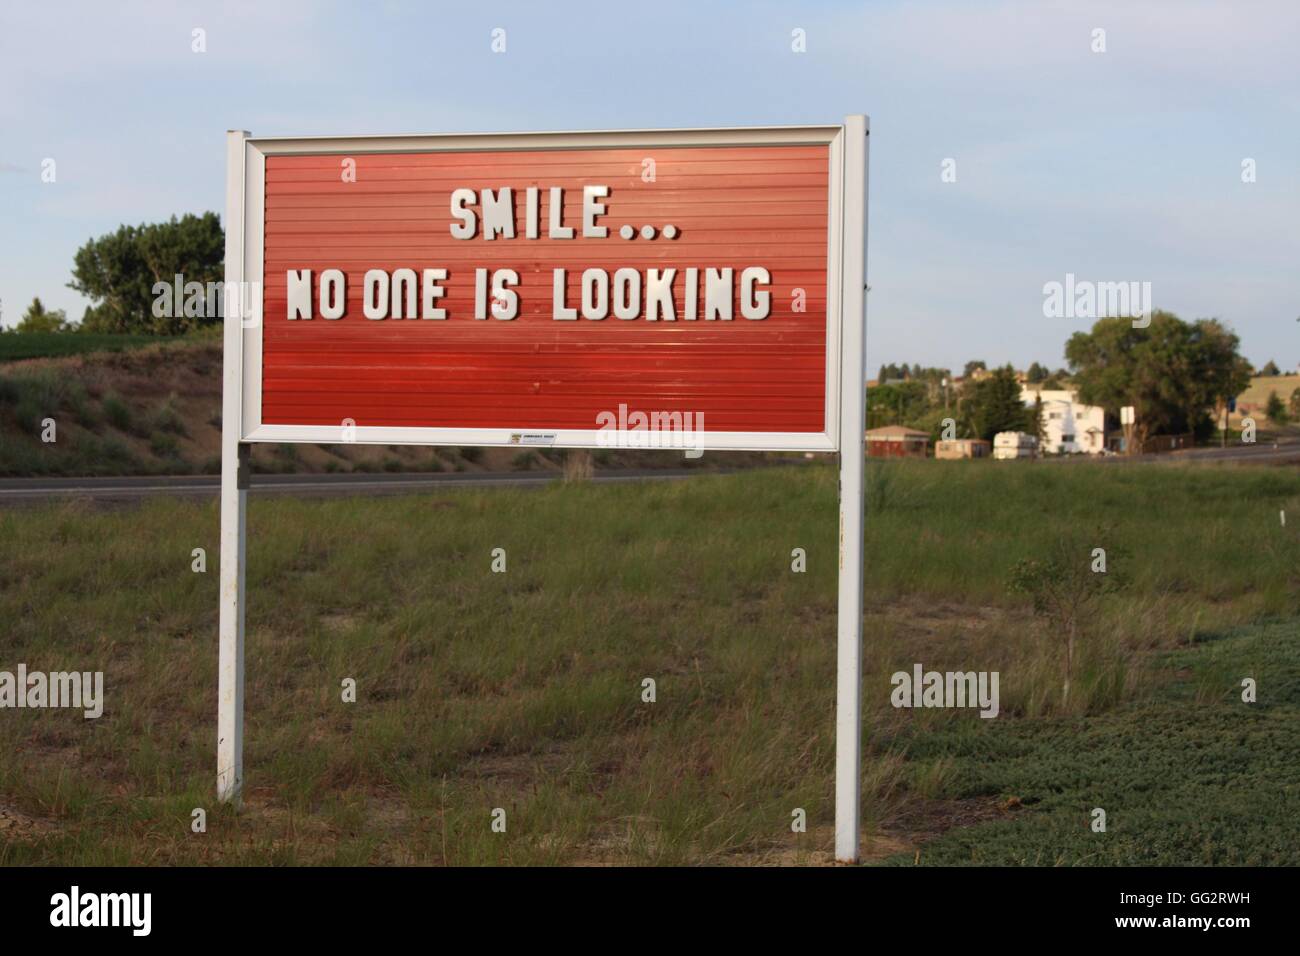 Motivational roadside message in north west USA Stock Photo